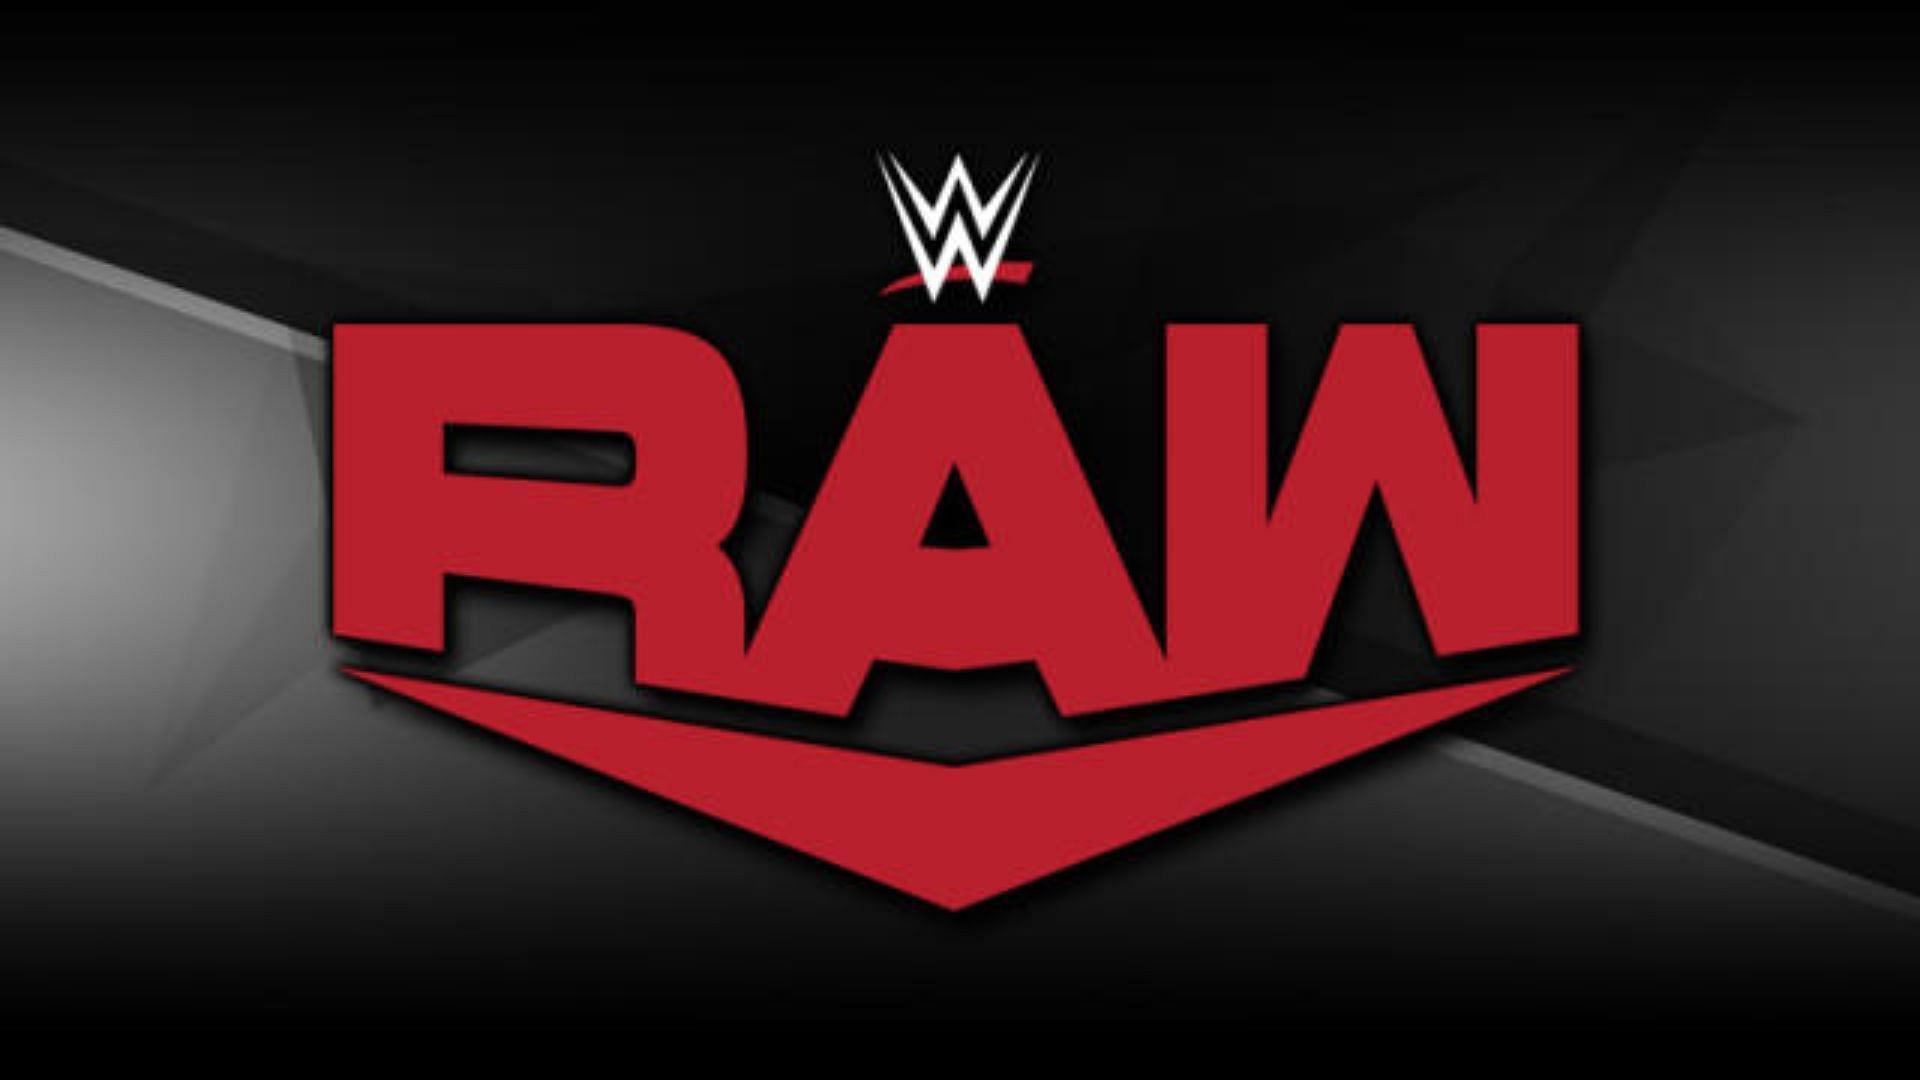 First show of WWE RAW where the upshot of the draft is expected to commence.